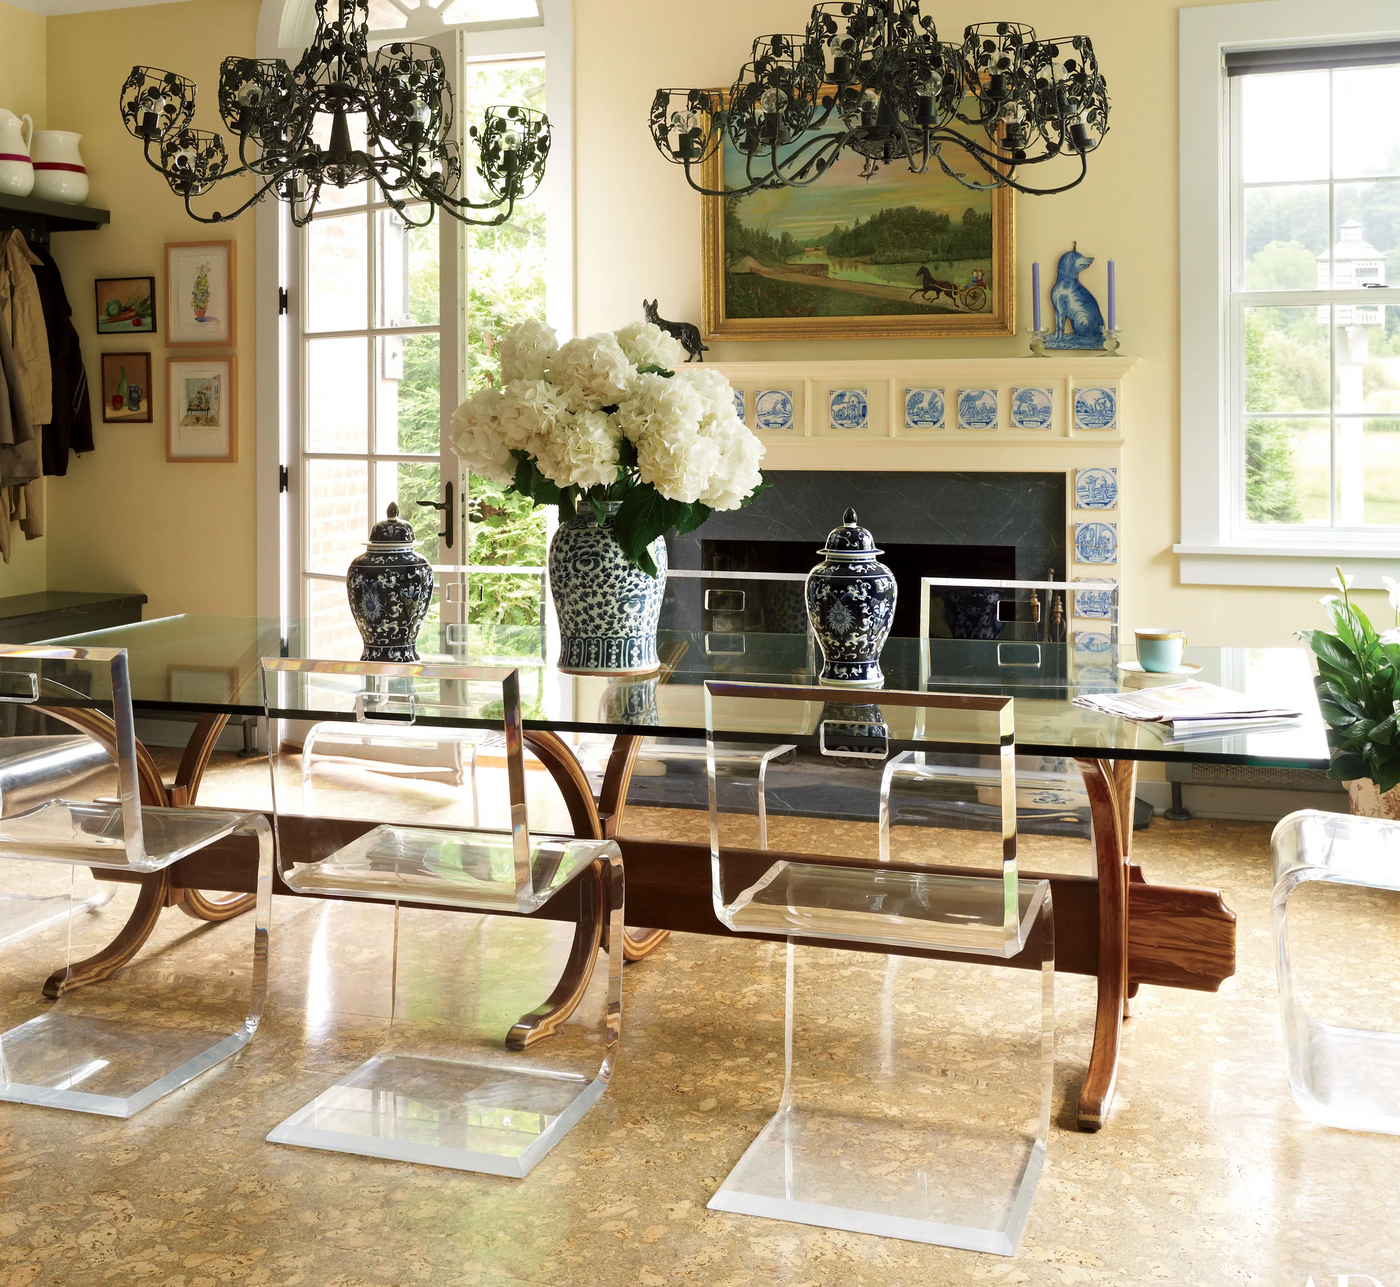 How To Clean Lucite Furniture